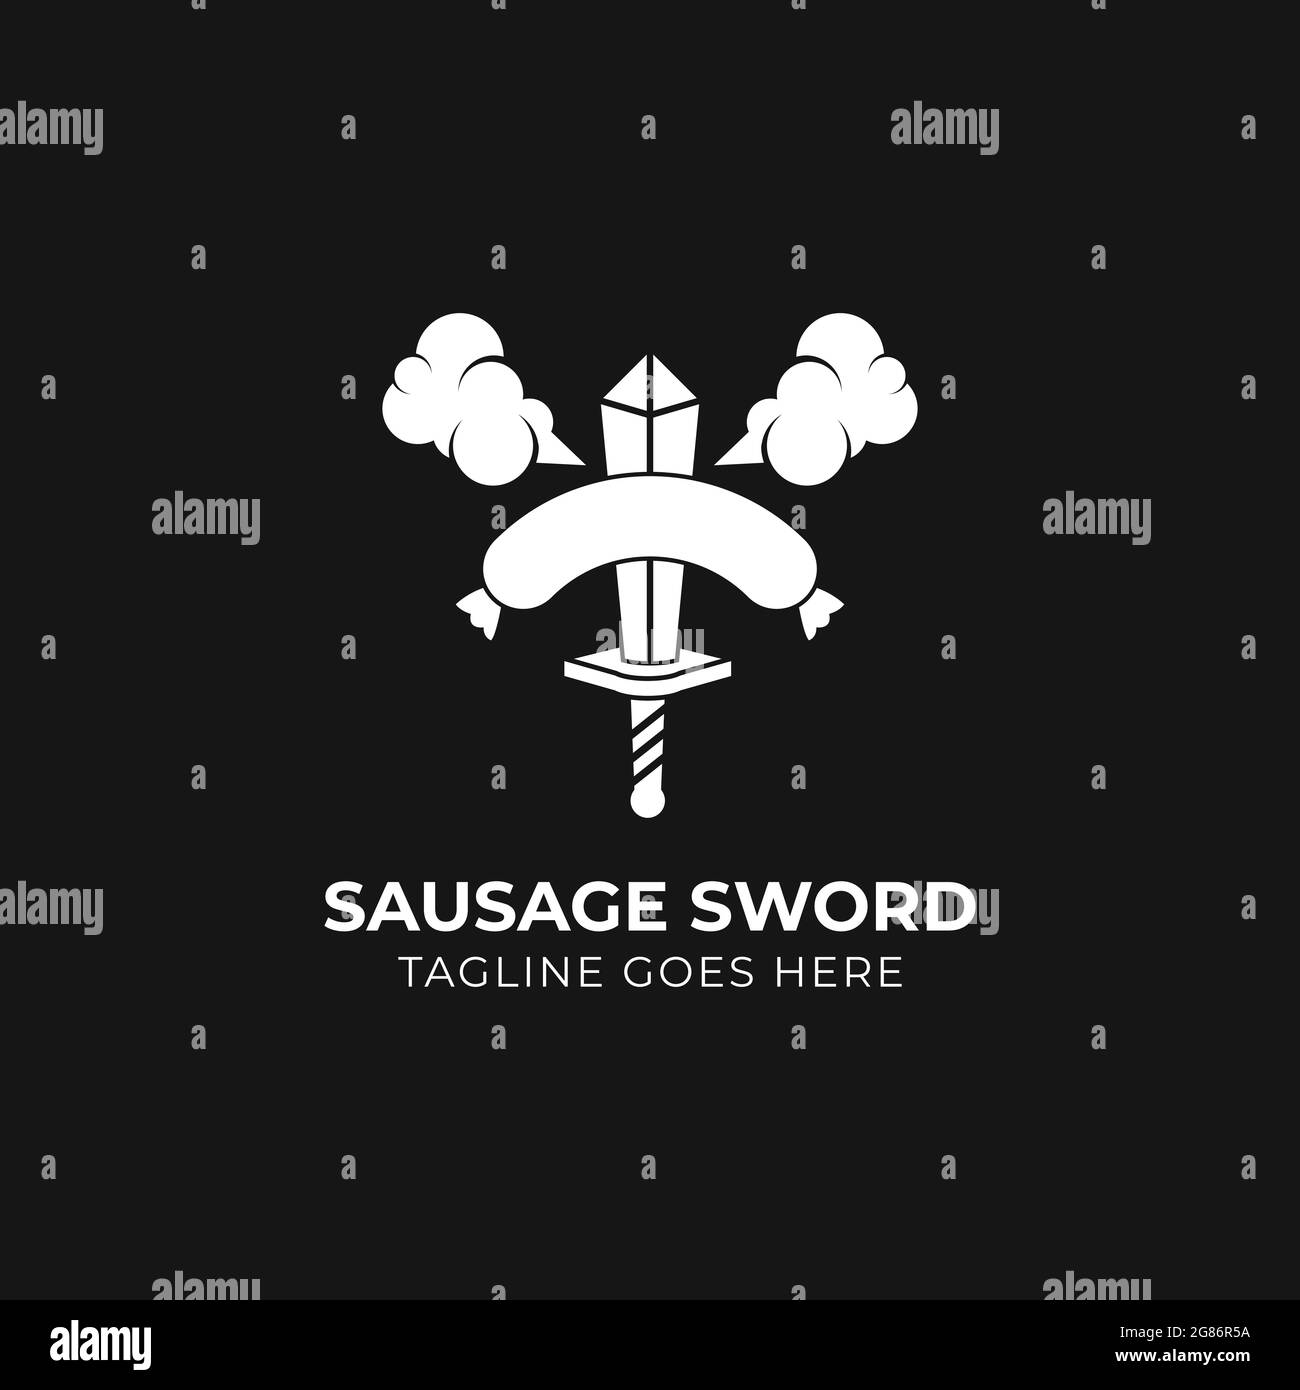 Sausage grill with sword and smoke, design inspiration for restaurant logo Stock Vector